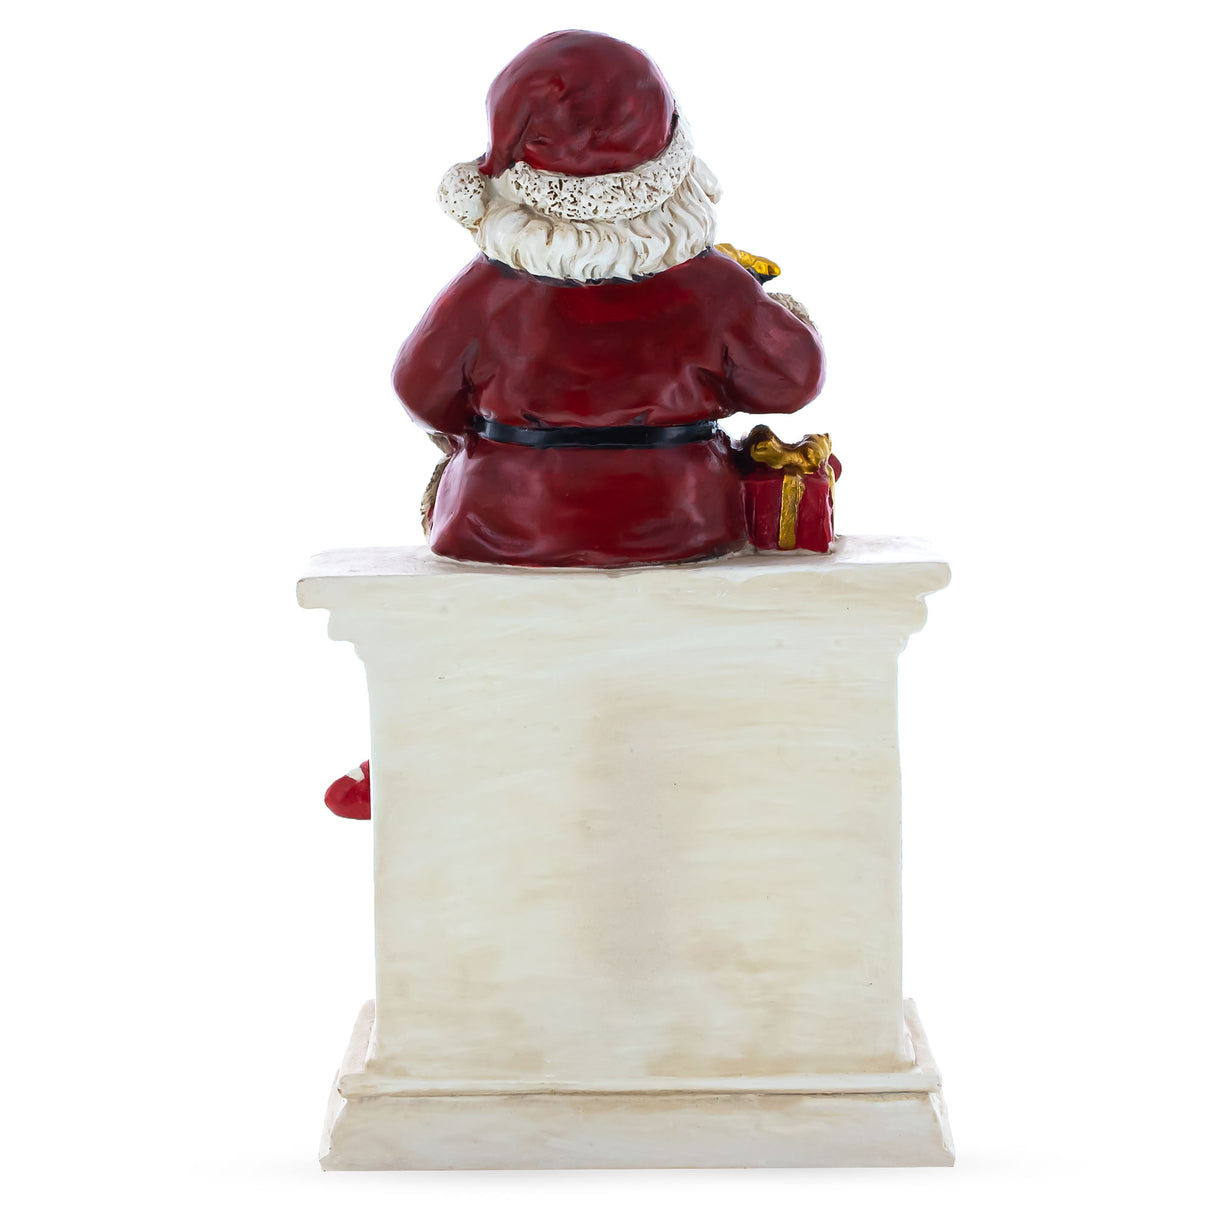 Santa Sitting on a Fireplace LED Lights Figurine 7.75 Inches ,dimensions in inches: 7.75 x 10.15 x 6.28